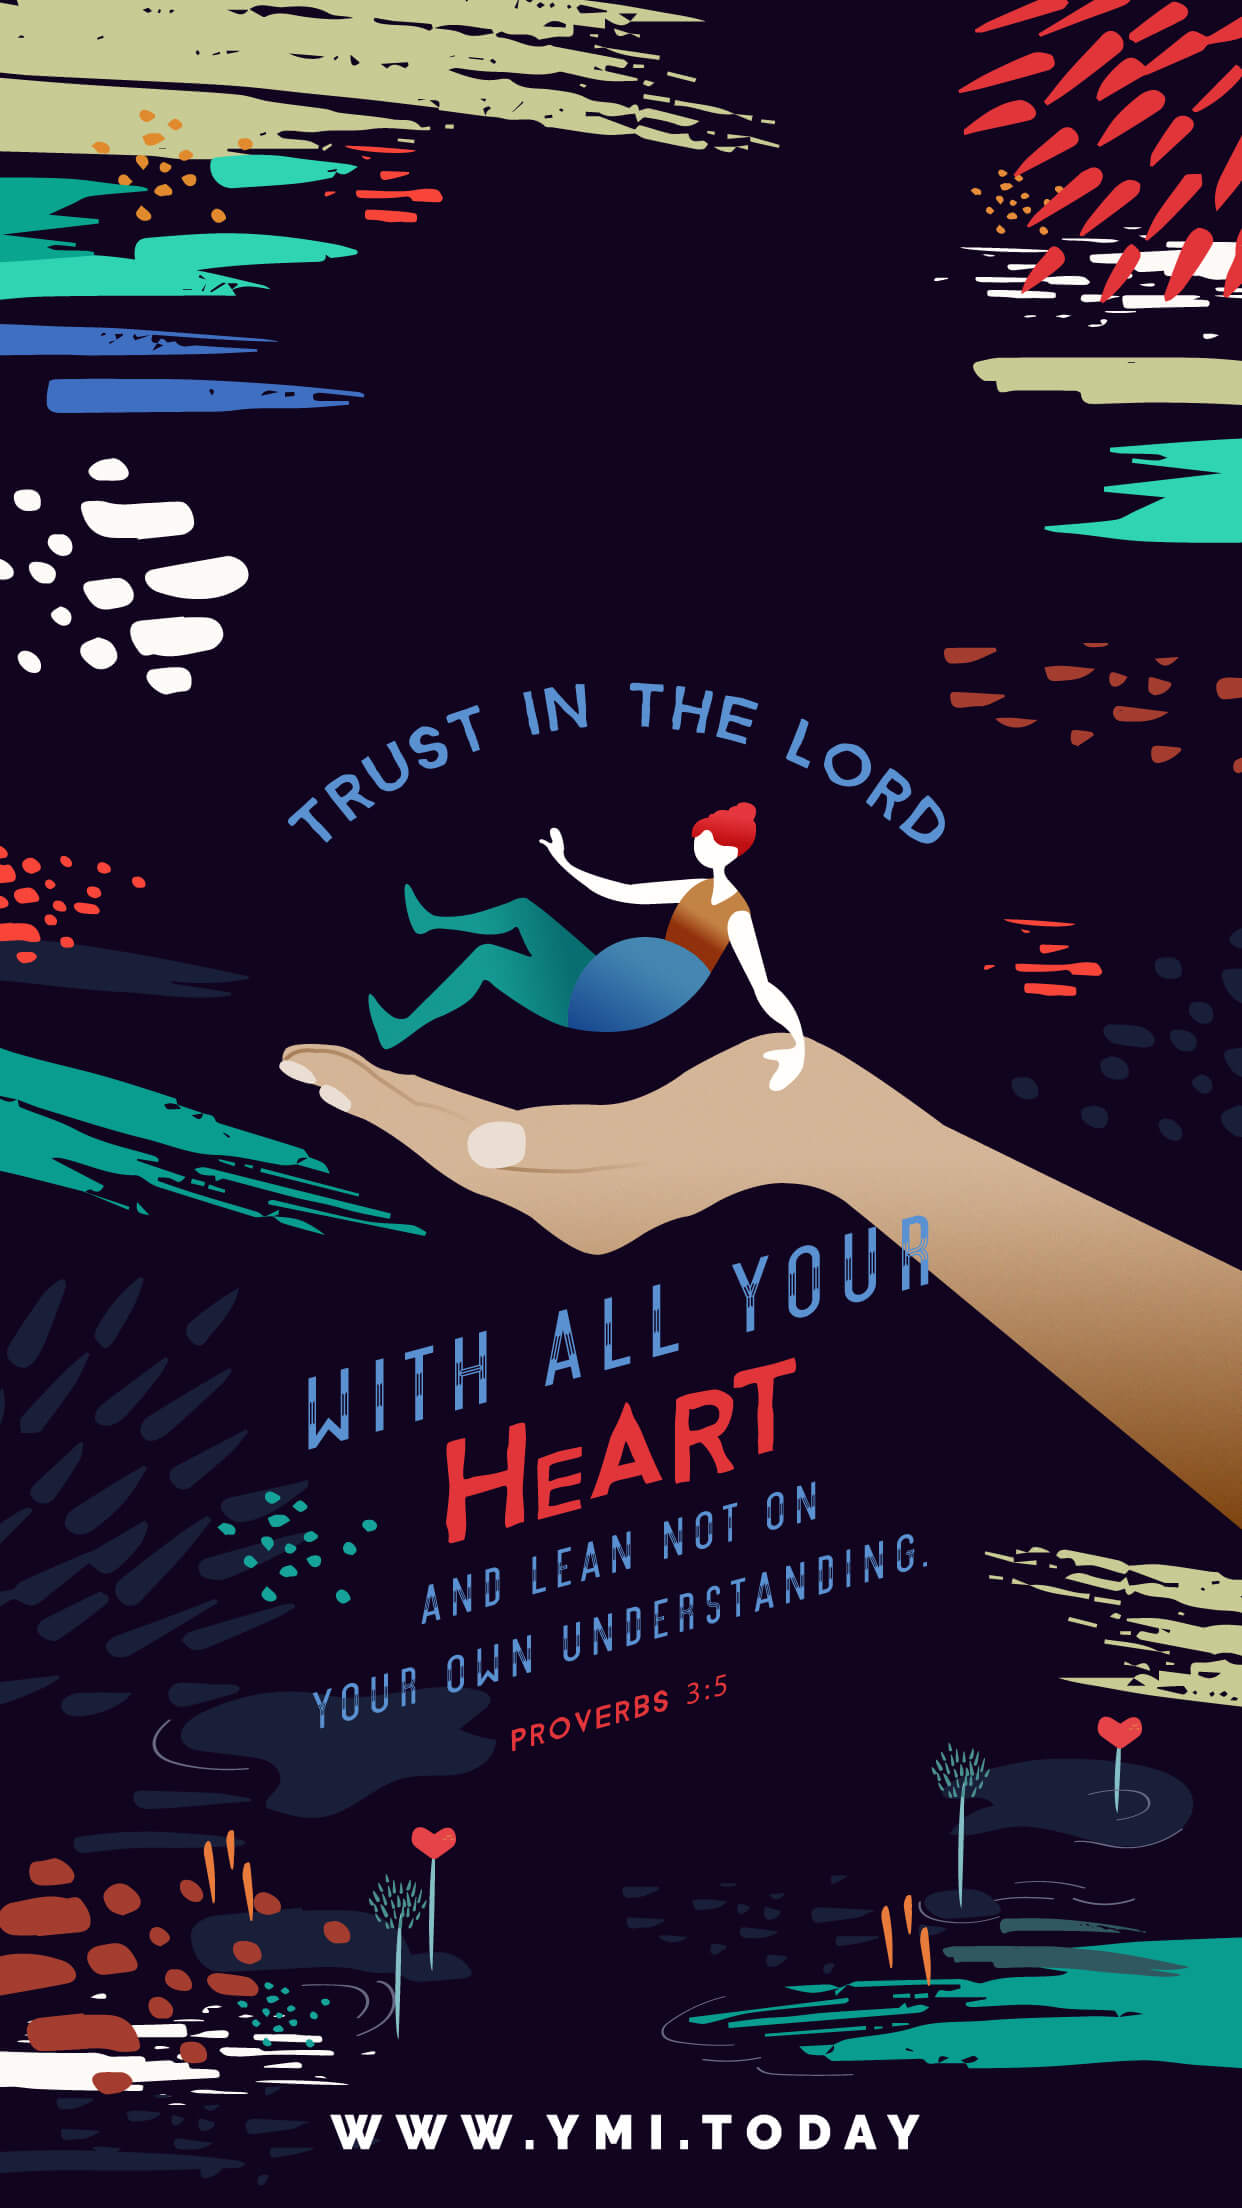 YMI March 2017 Phone Lockscreen - Trust in the Lord with all your heart and lean not on your own understanding. - Proverbs 3:5